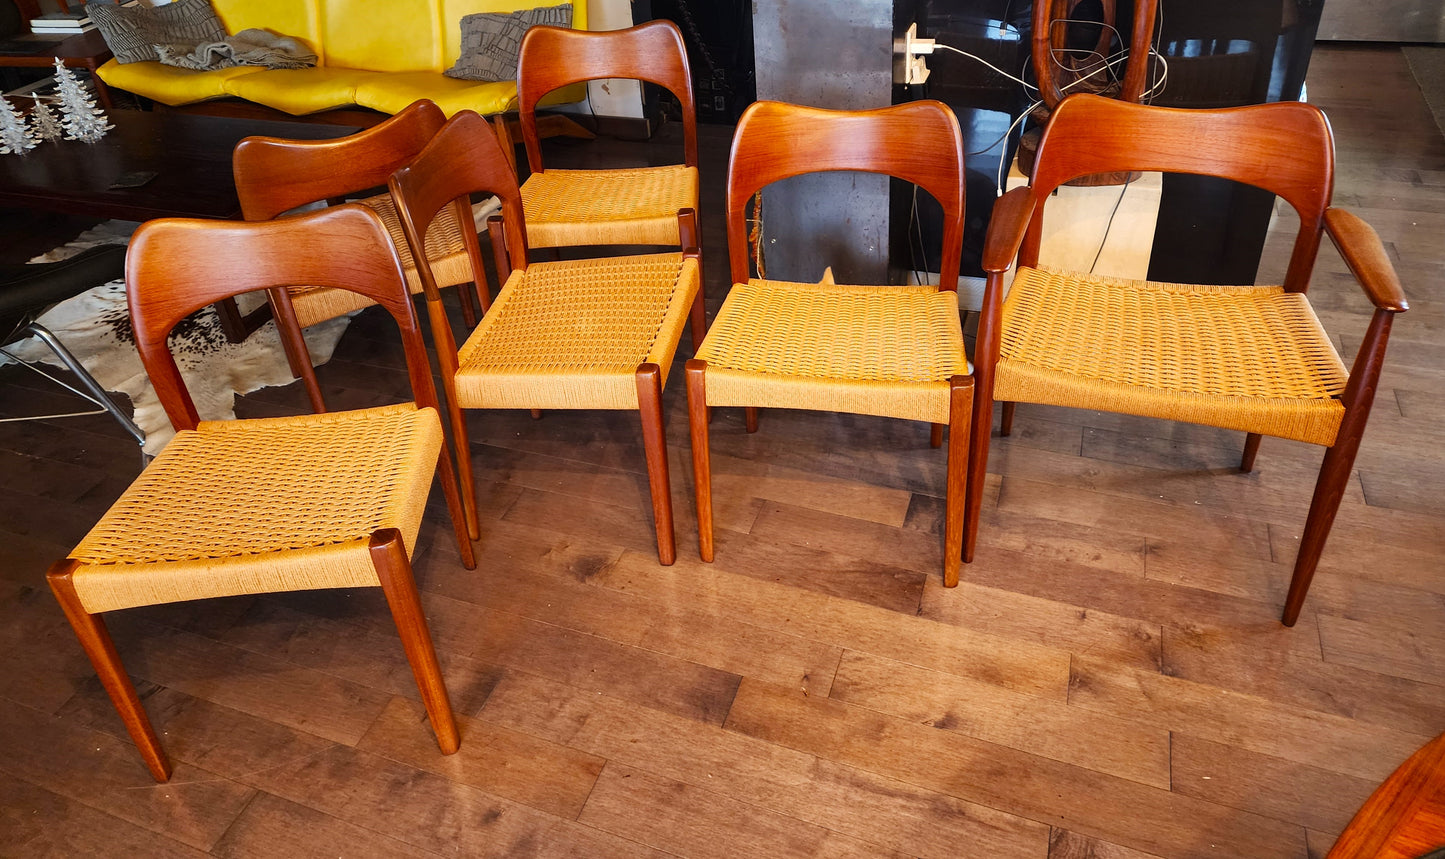 6 RESTORED Danish Mid Century Modern Teak & Papercord Chairs by A.H. Olsen for M.Kold